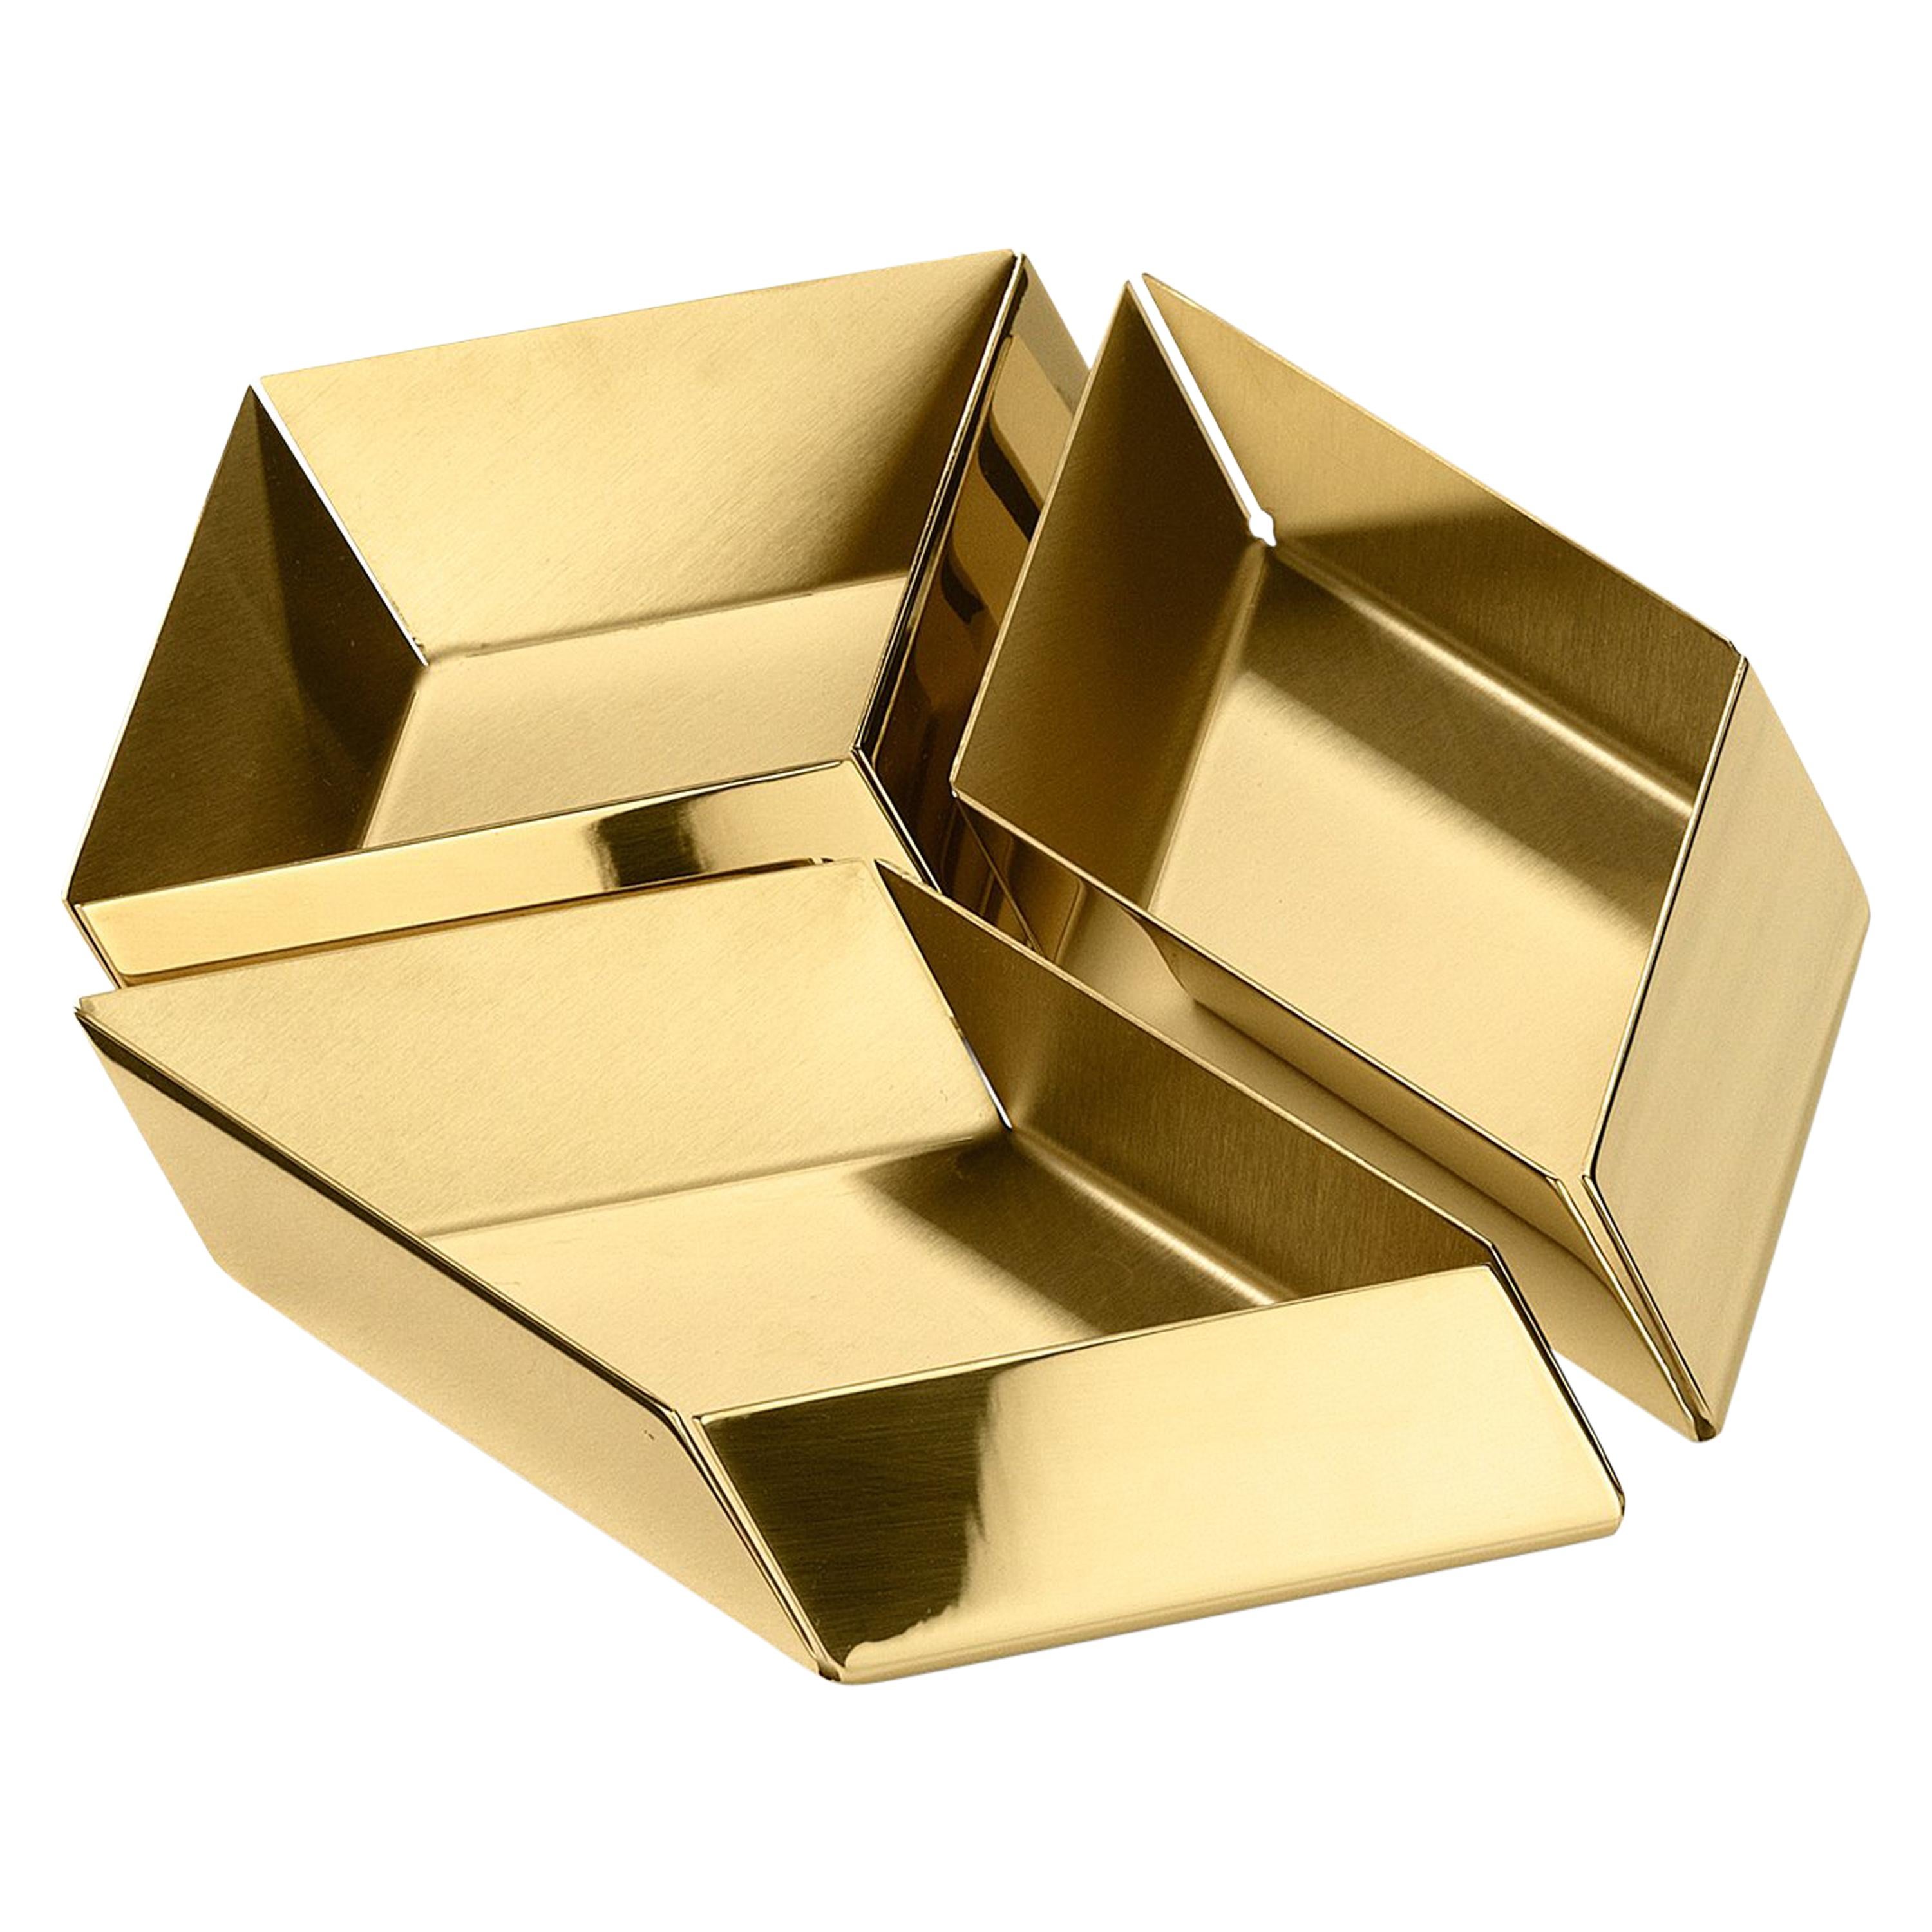 Ghidini 1961 Axonometry Small Cube Tray in Brass by Elisa Giovanni